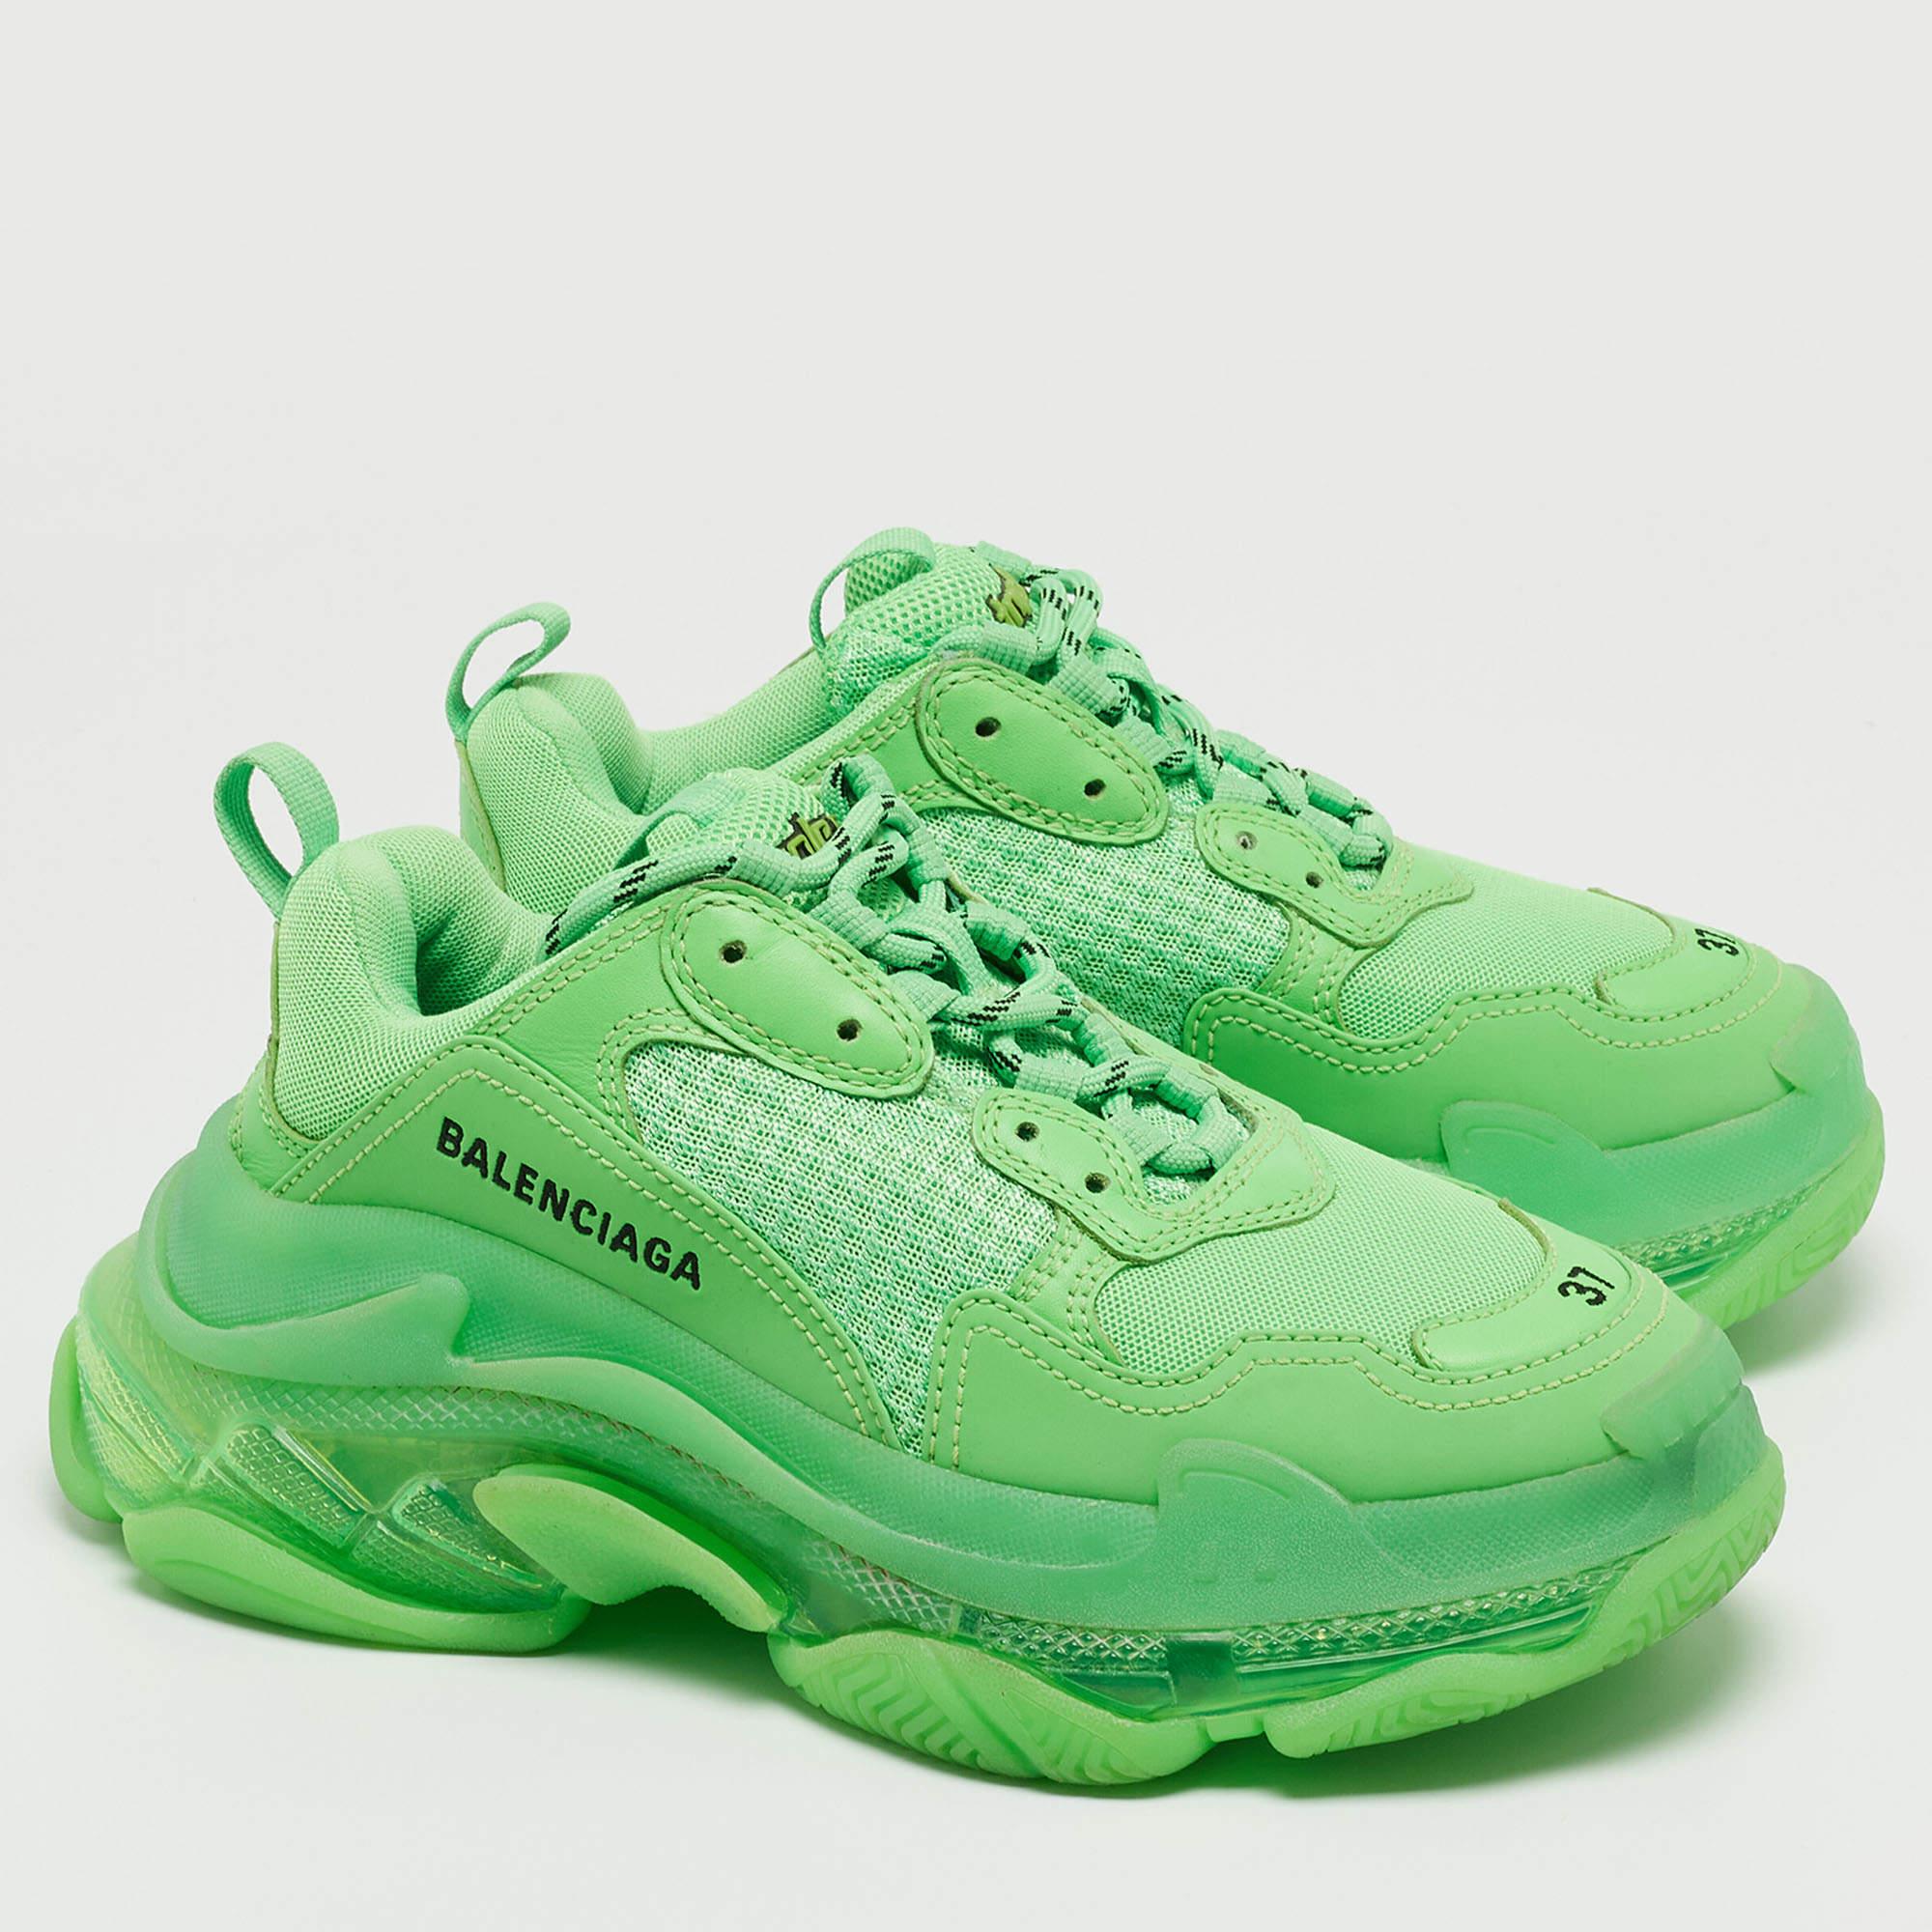 Balenciaga Green Mesh and Leather Triple S Low Top Sneakers Size 37 In Excellent Condition For Sale In Dubai, Al Qouz 2